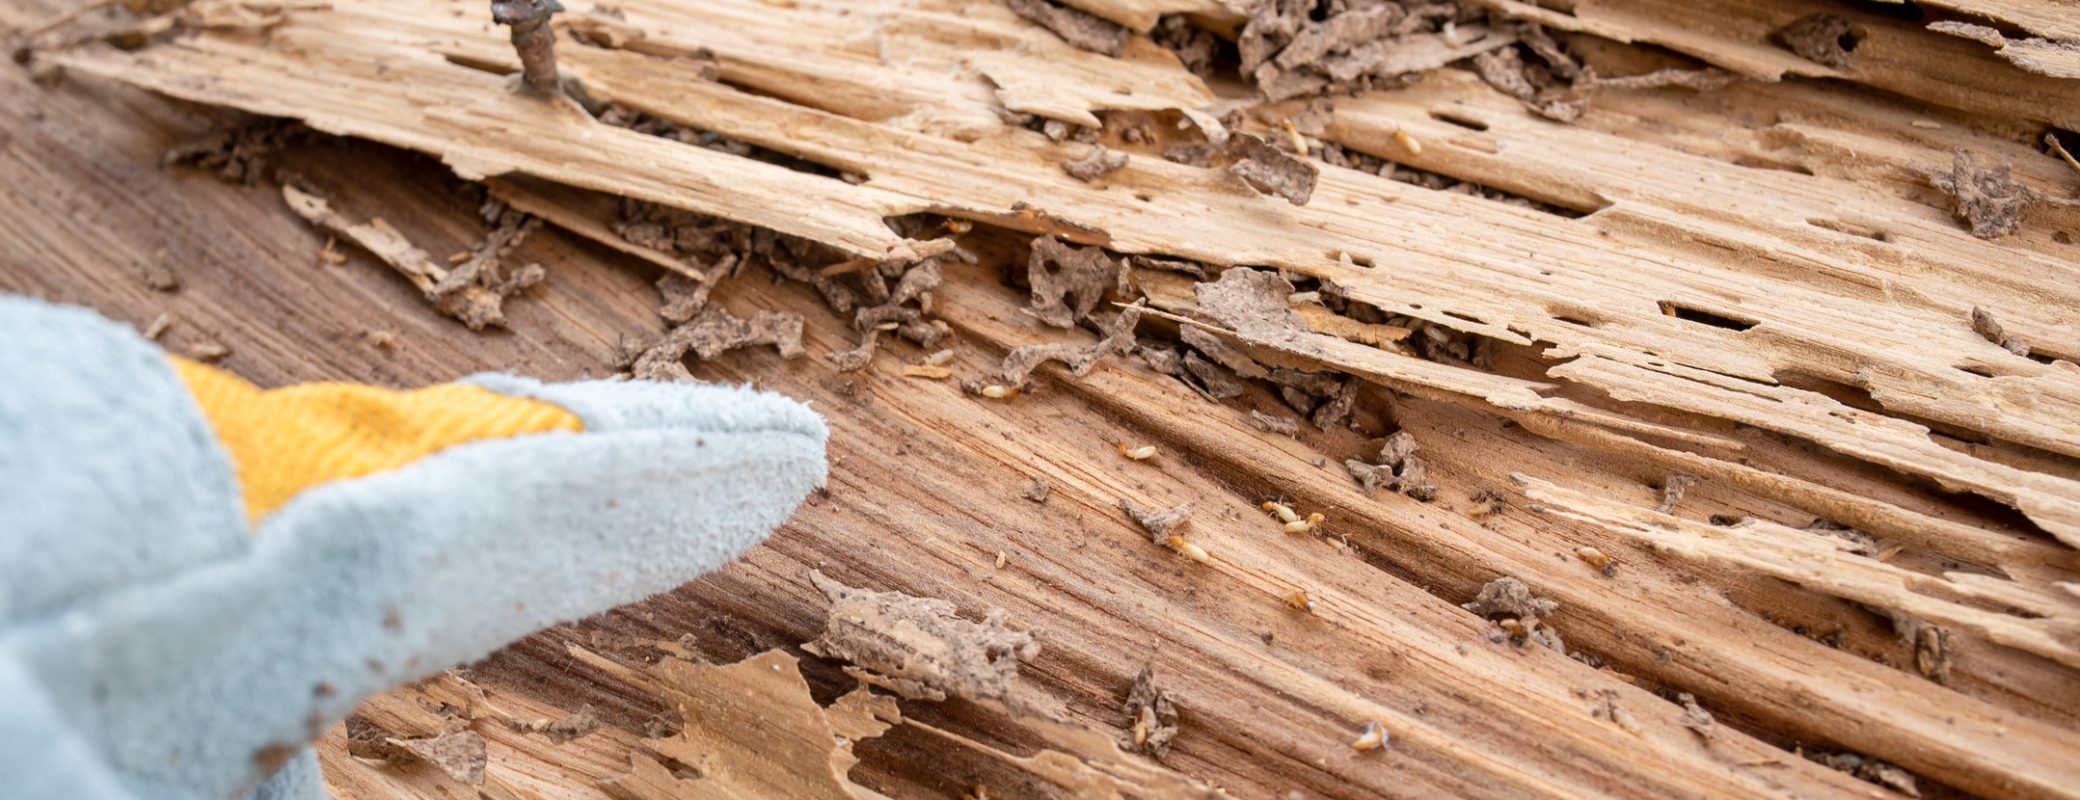 Background image Traces of wood that is eaten by termites, harms the wood by termites, wooden background